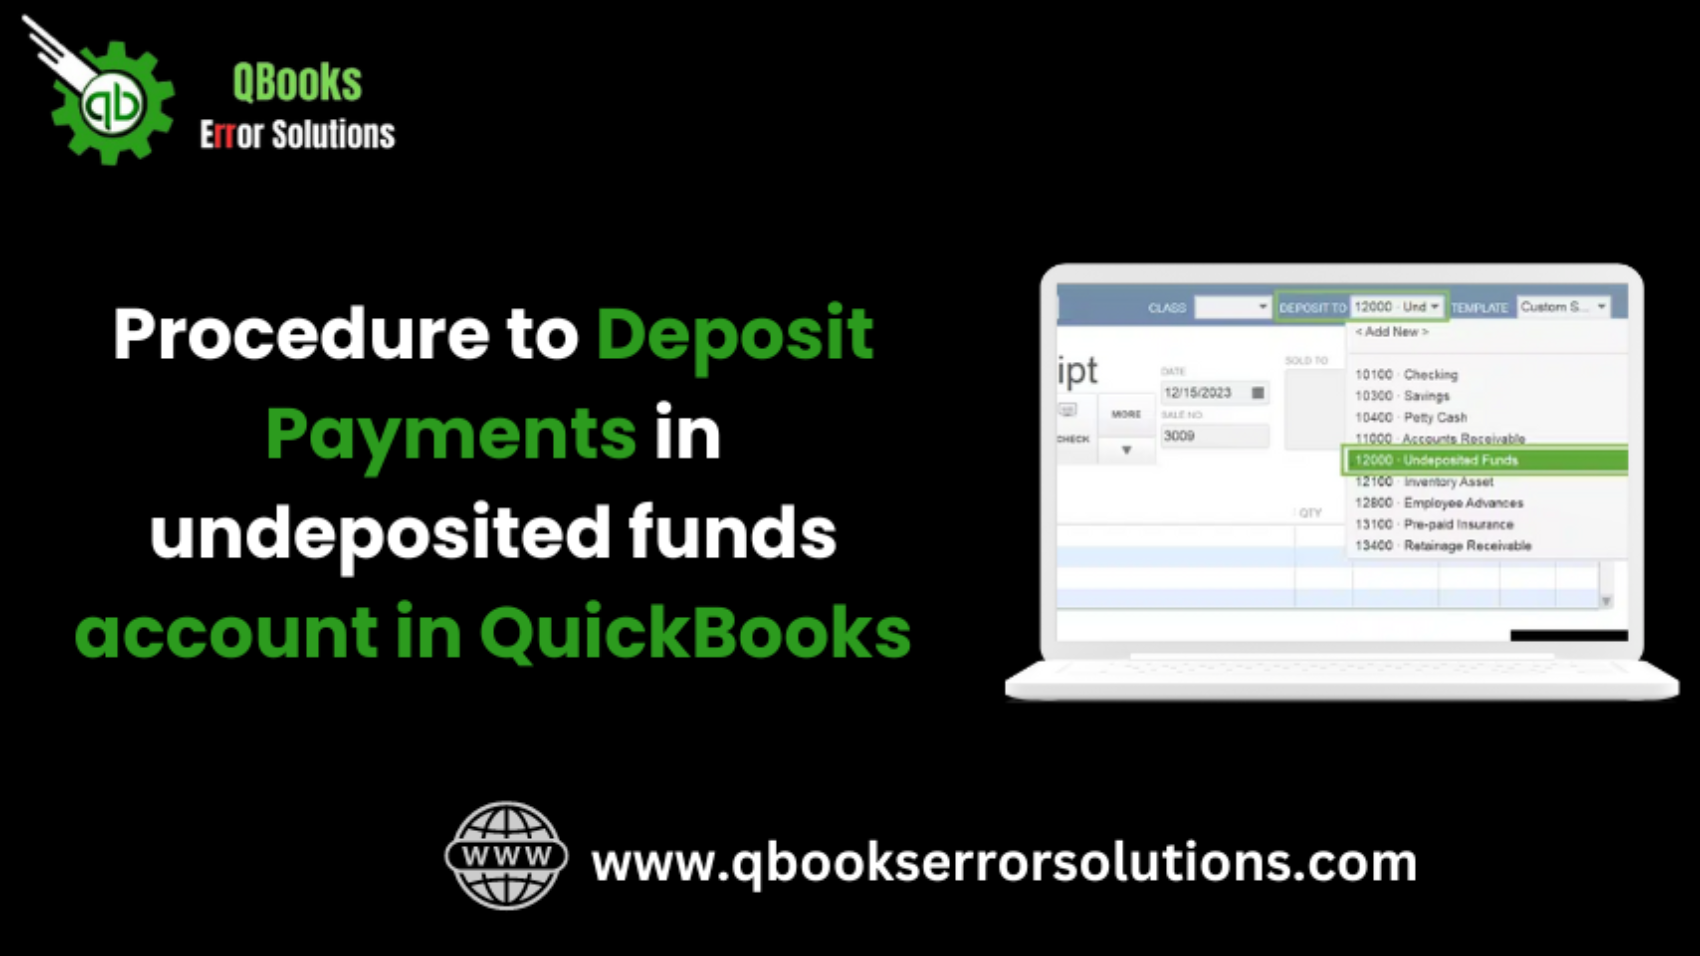 Procedure to Deposit Payments in undeposited funds account in QuickBooks